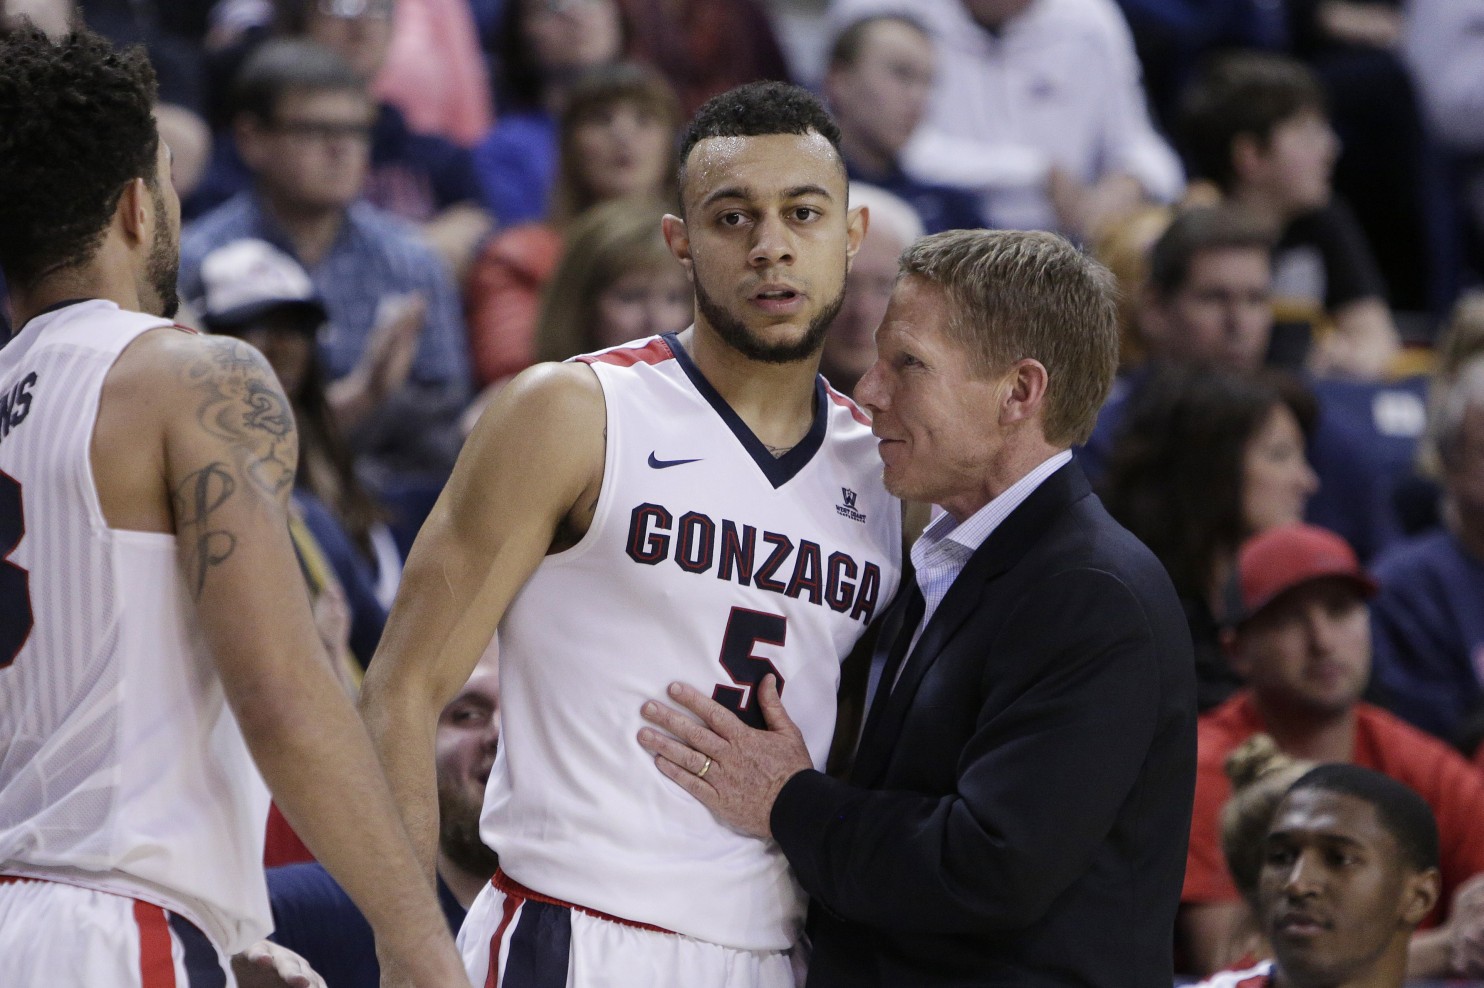 NCAA West Overview: Gonzaga is Real Deal - The Monday Morning Quarterback